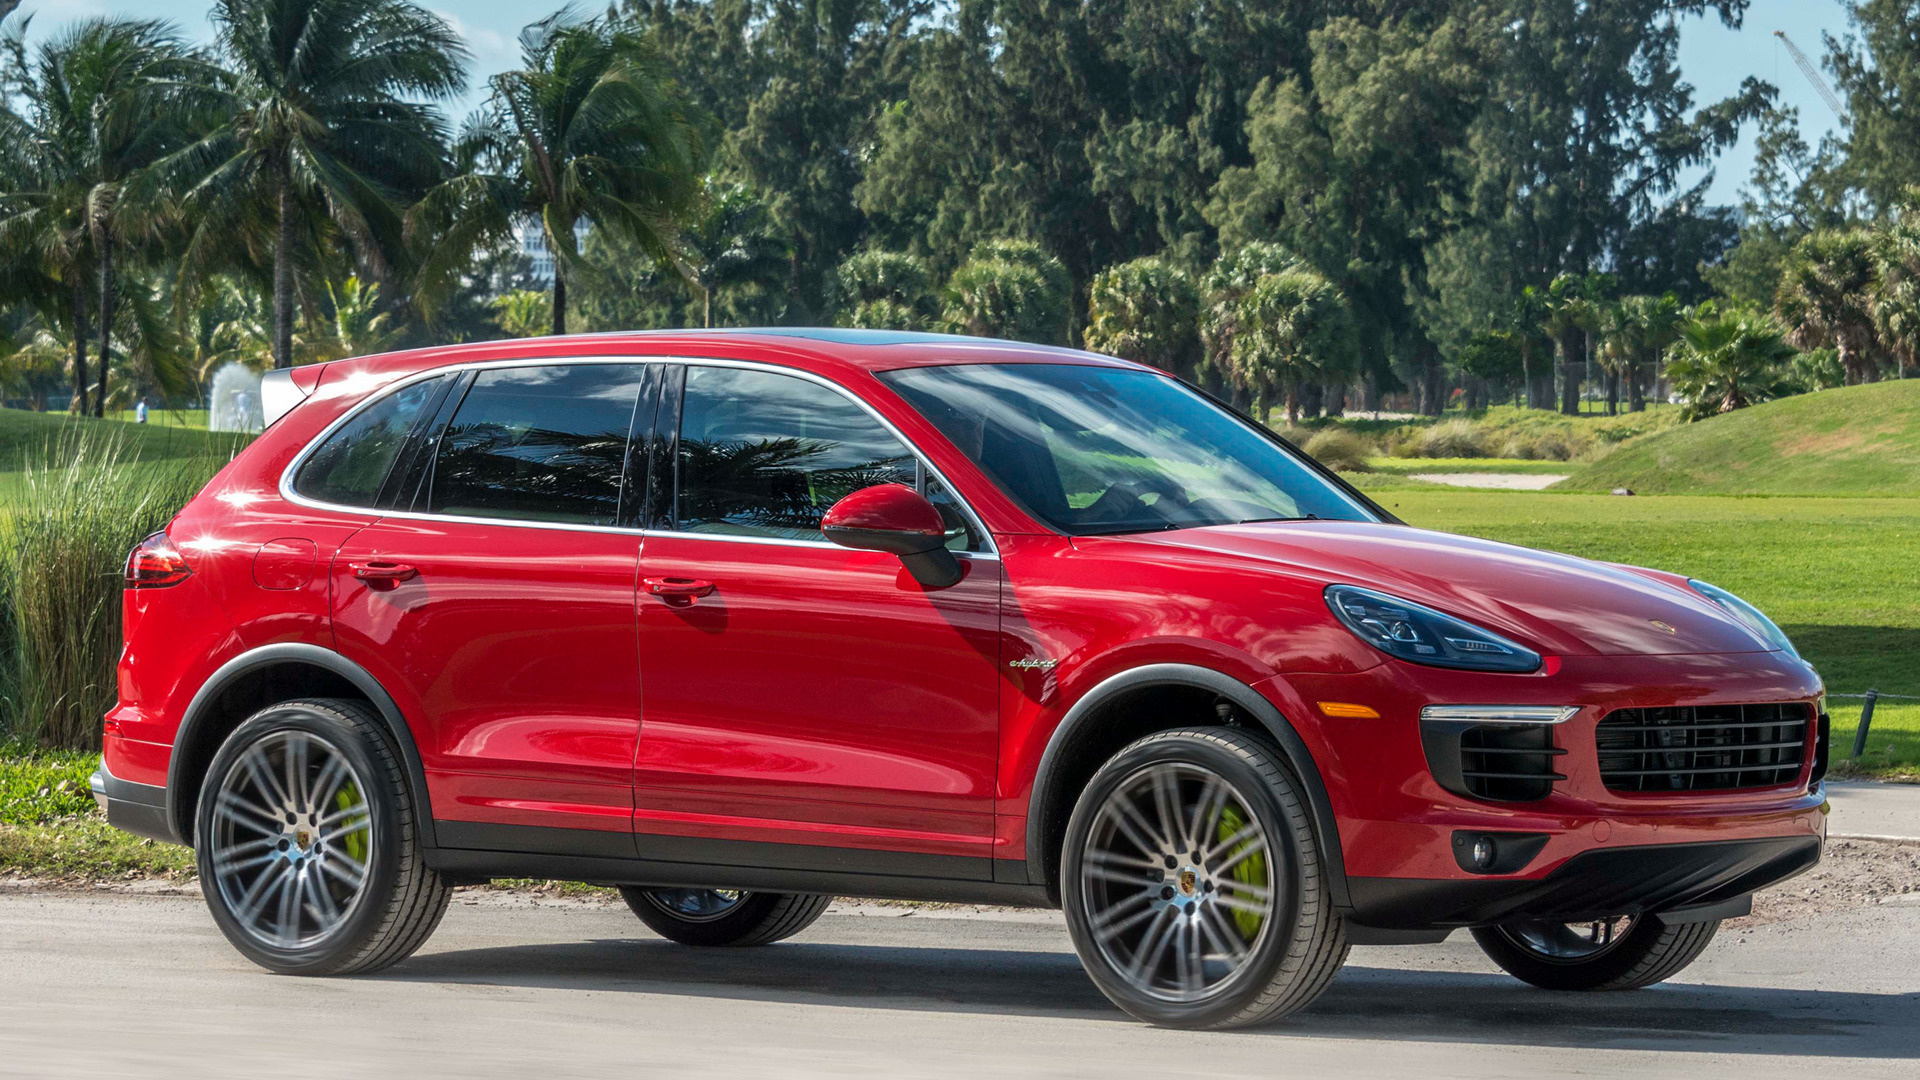 2015 Porsche Cayenne S E-Hybrid (US) - Wallpapers and HD Images | Car Pixel